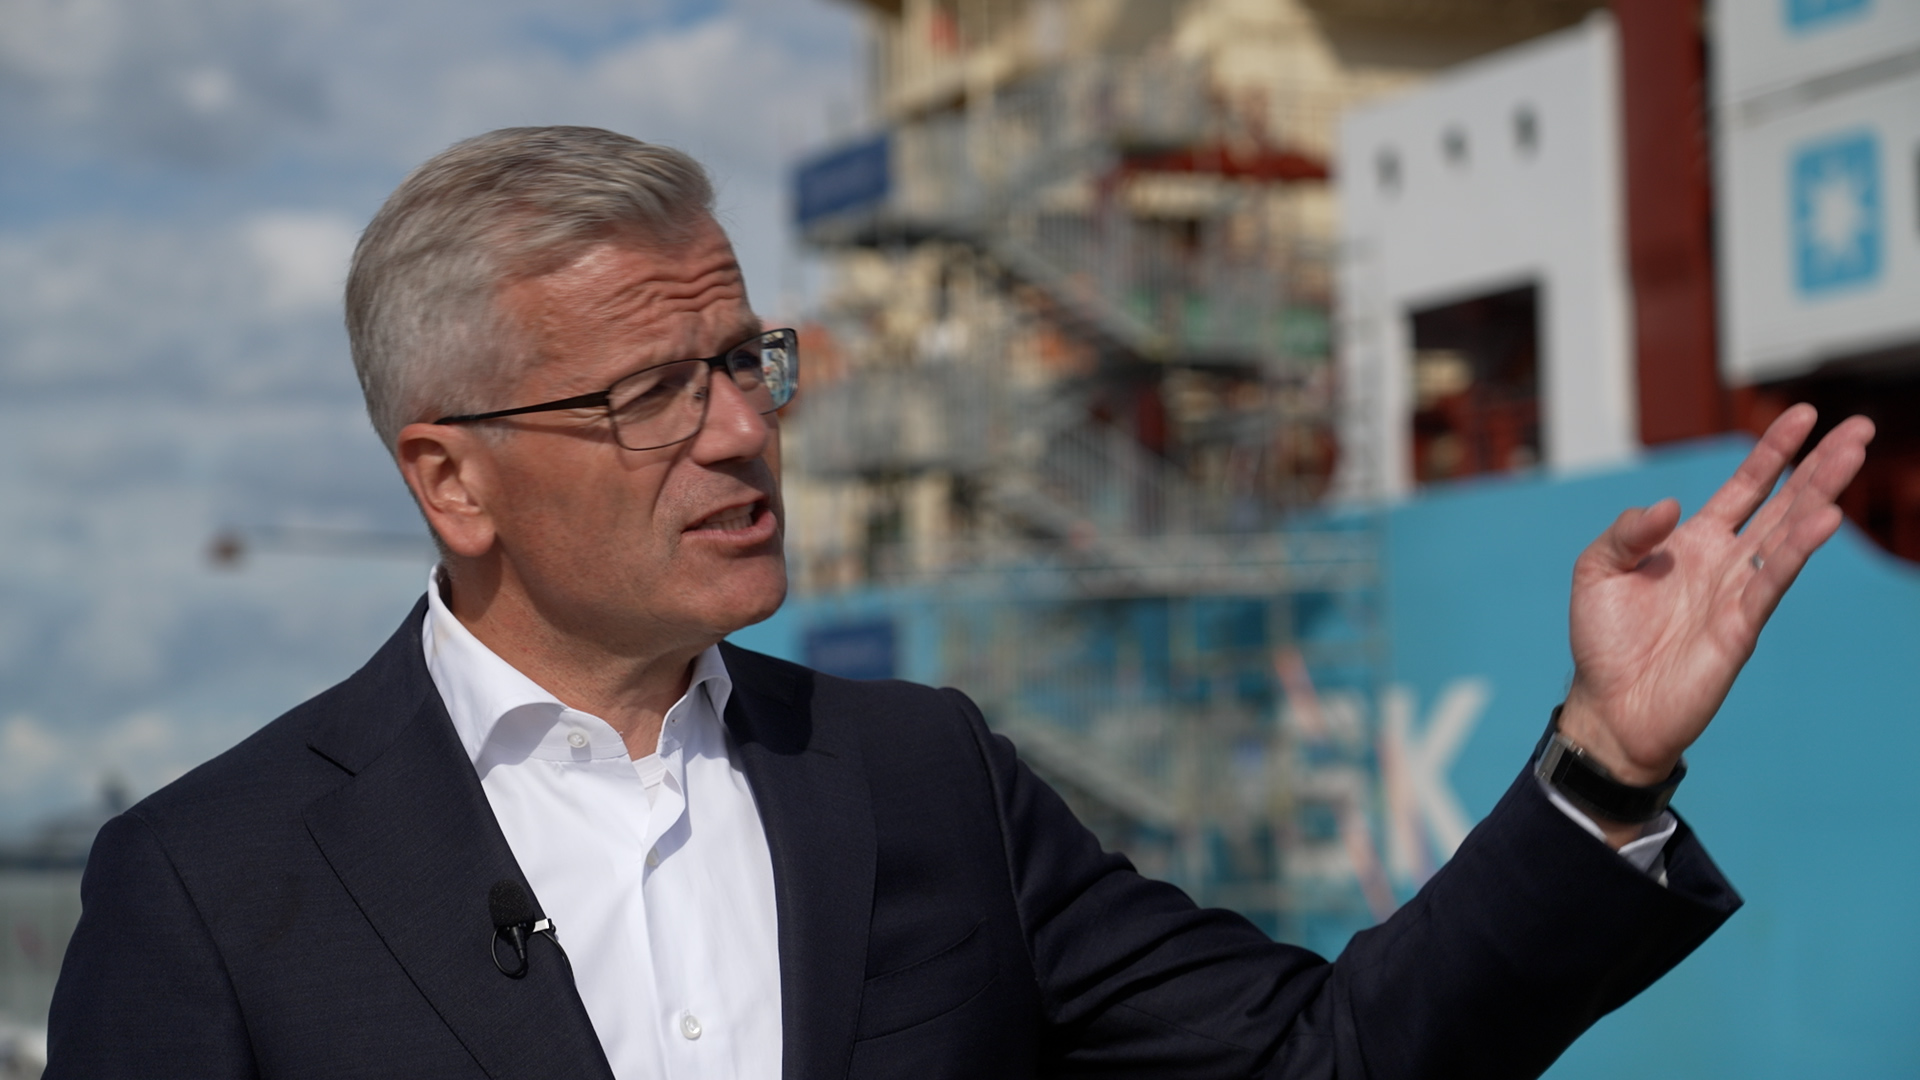 Swiss-born Vincent Clerc has been at the steering wheel at Maersk for nine months. /CGTN/Dworschak